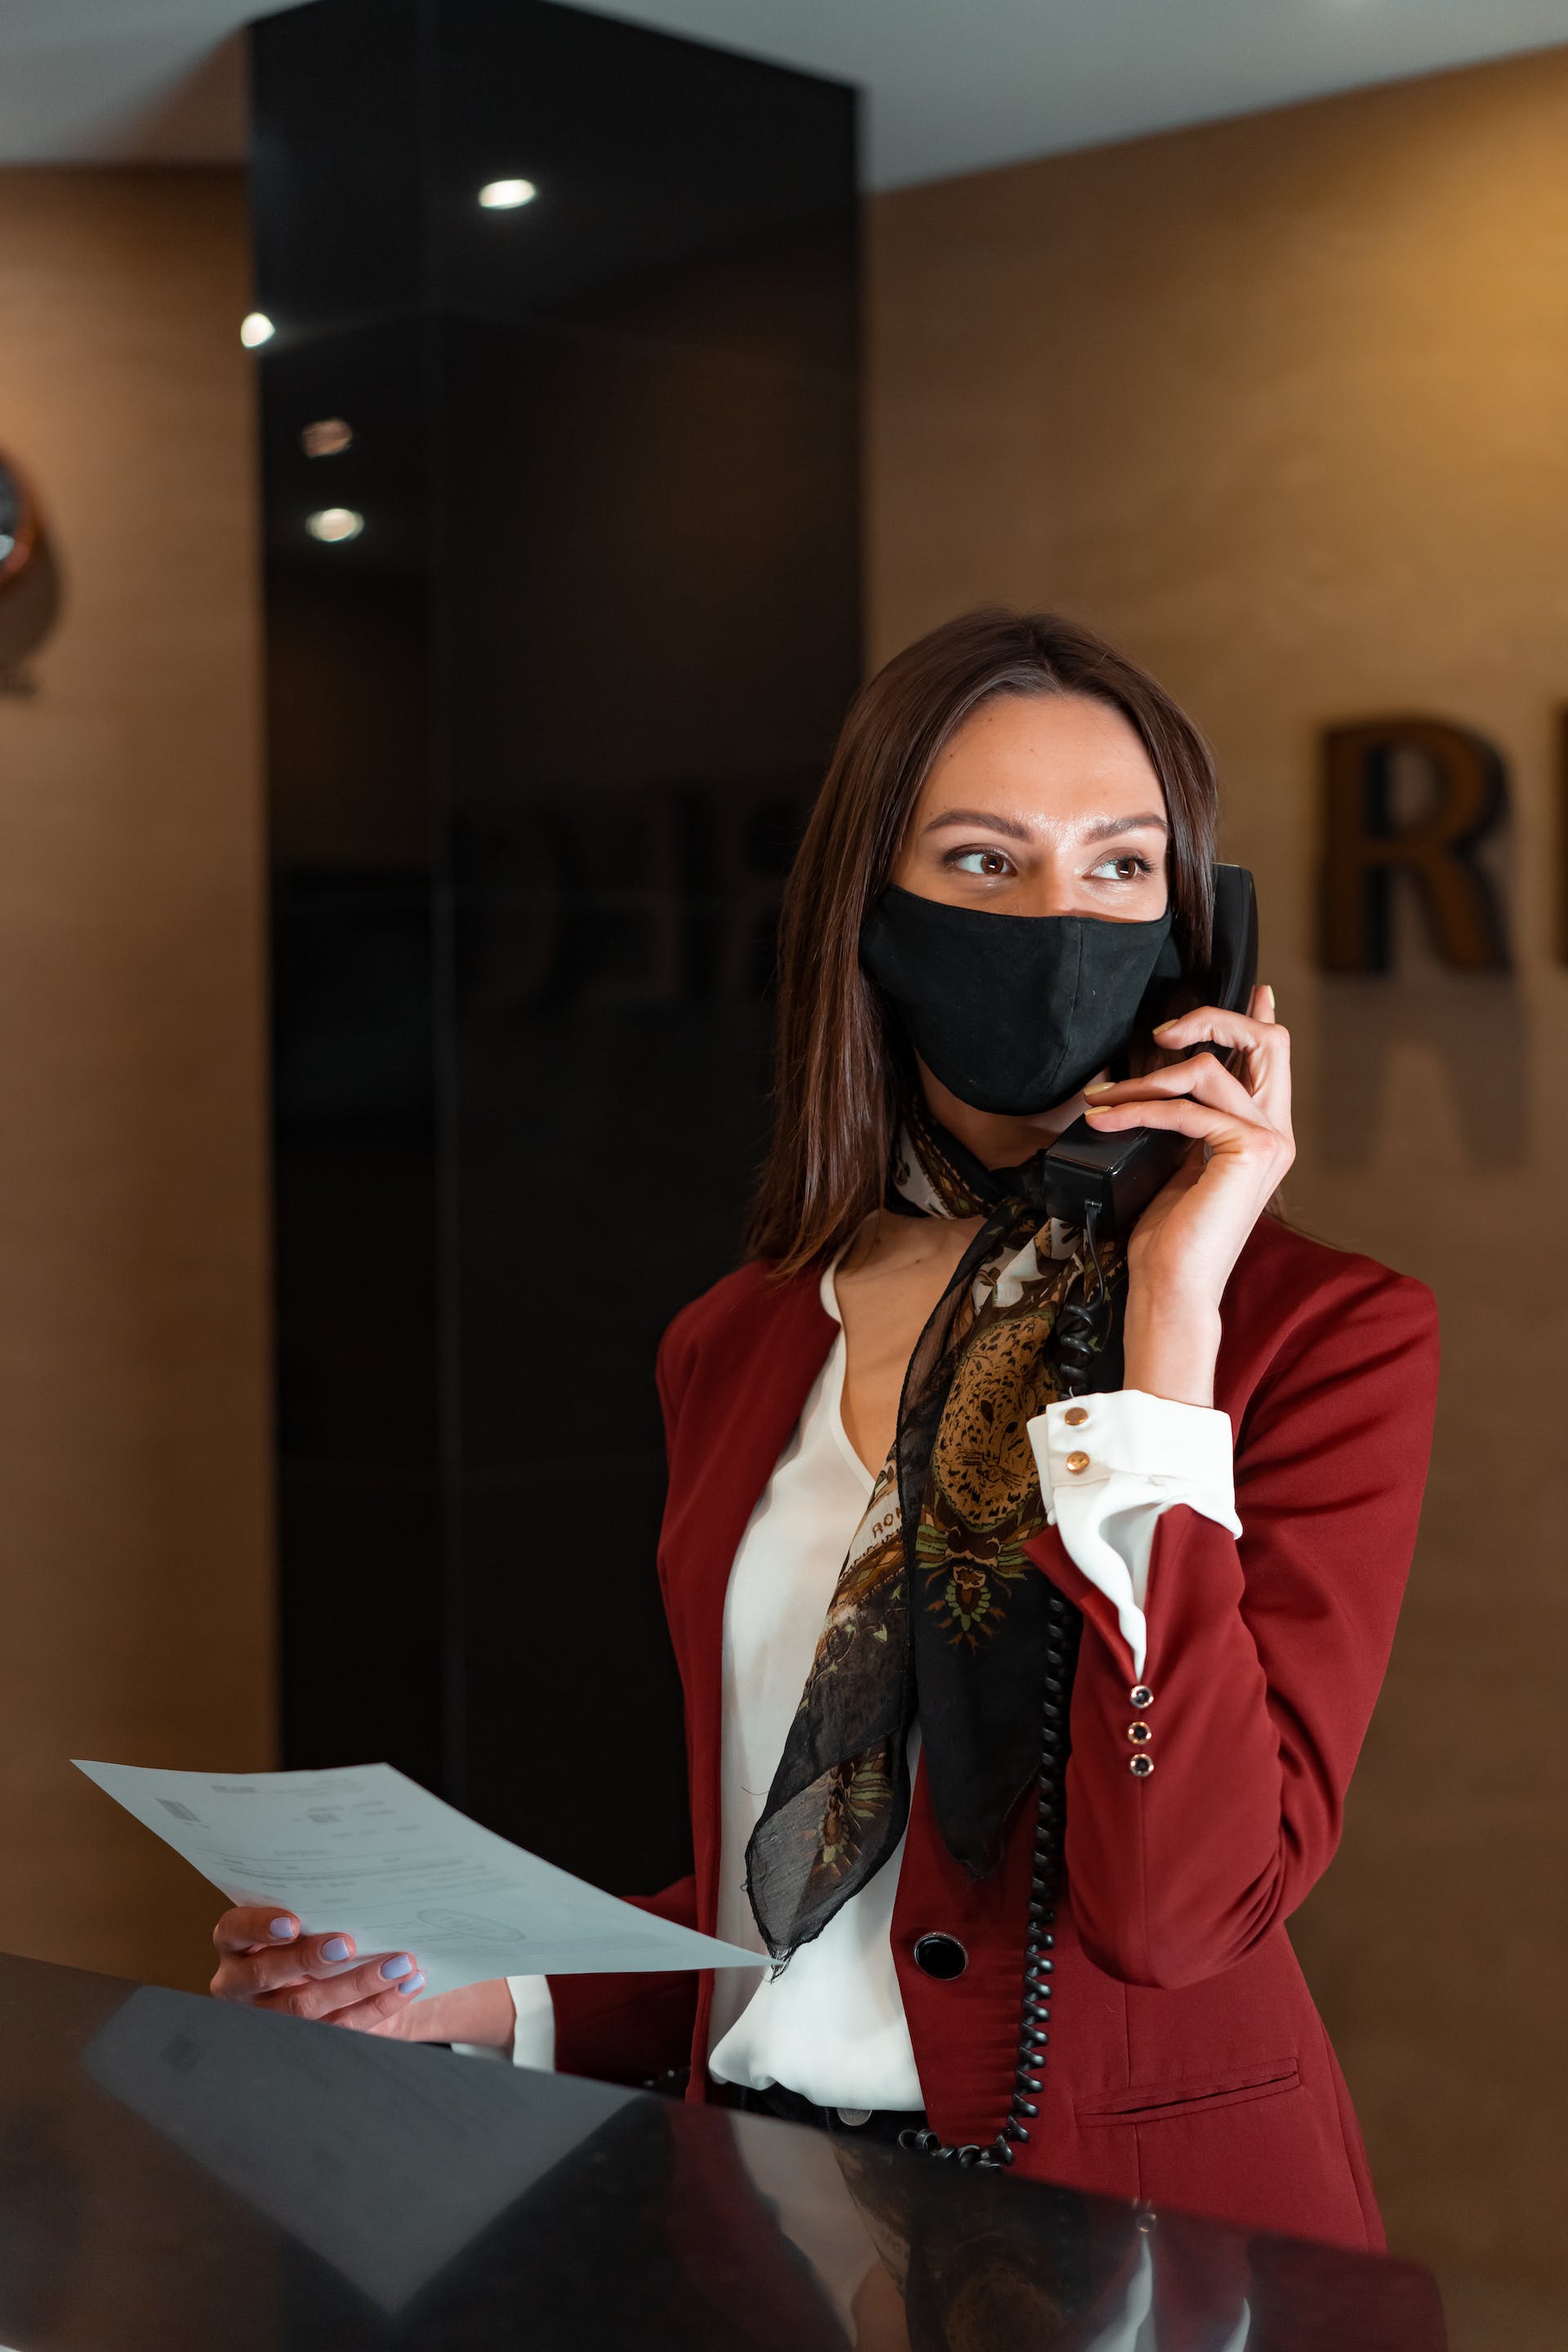 A woman talking on the phone at a hotel reception | Source: Pexels